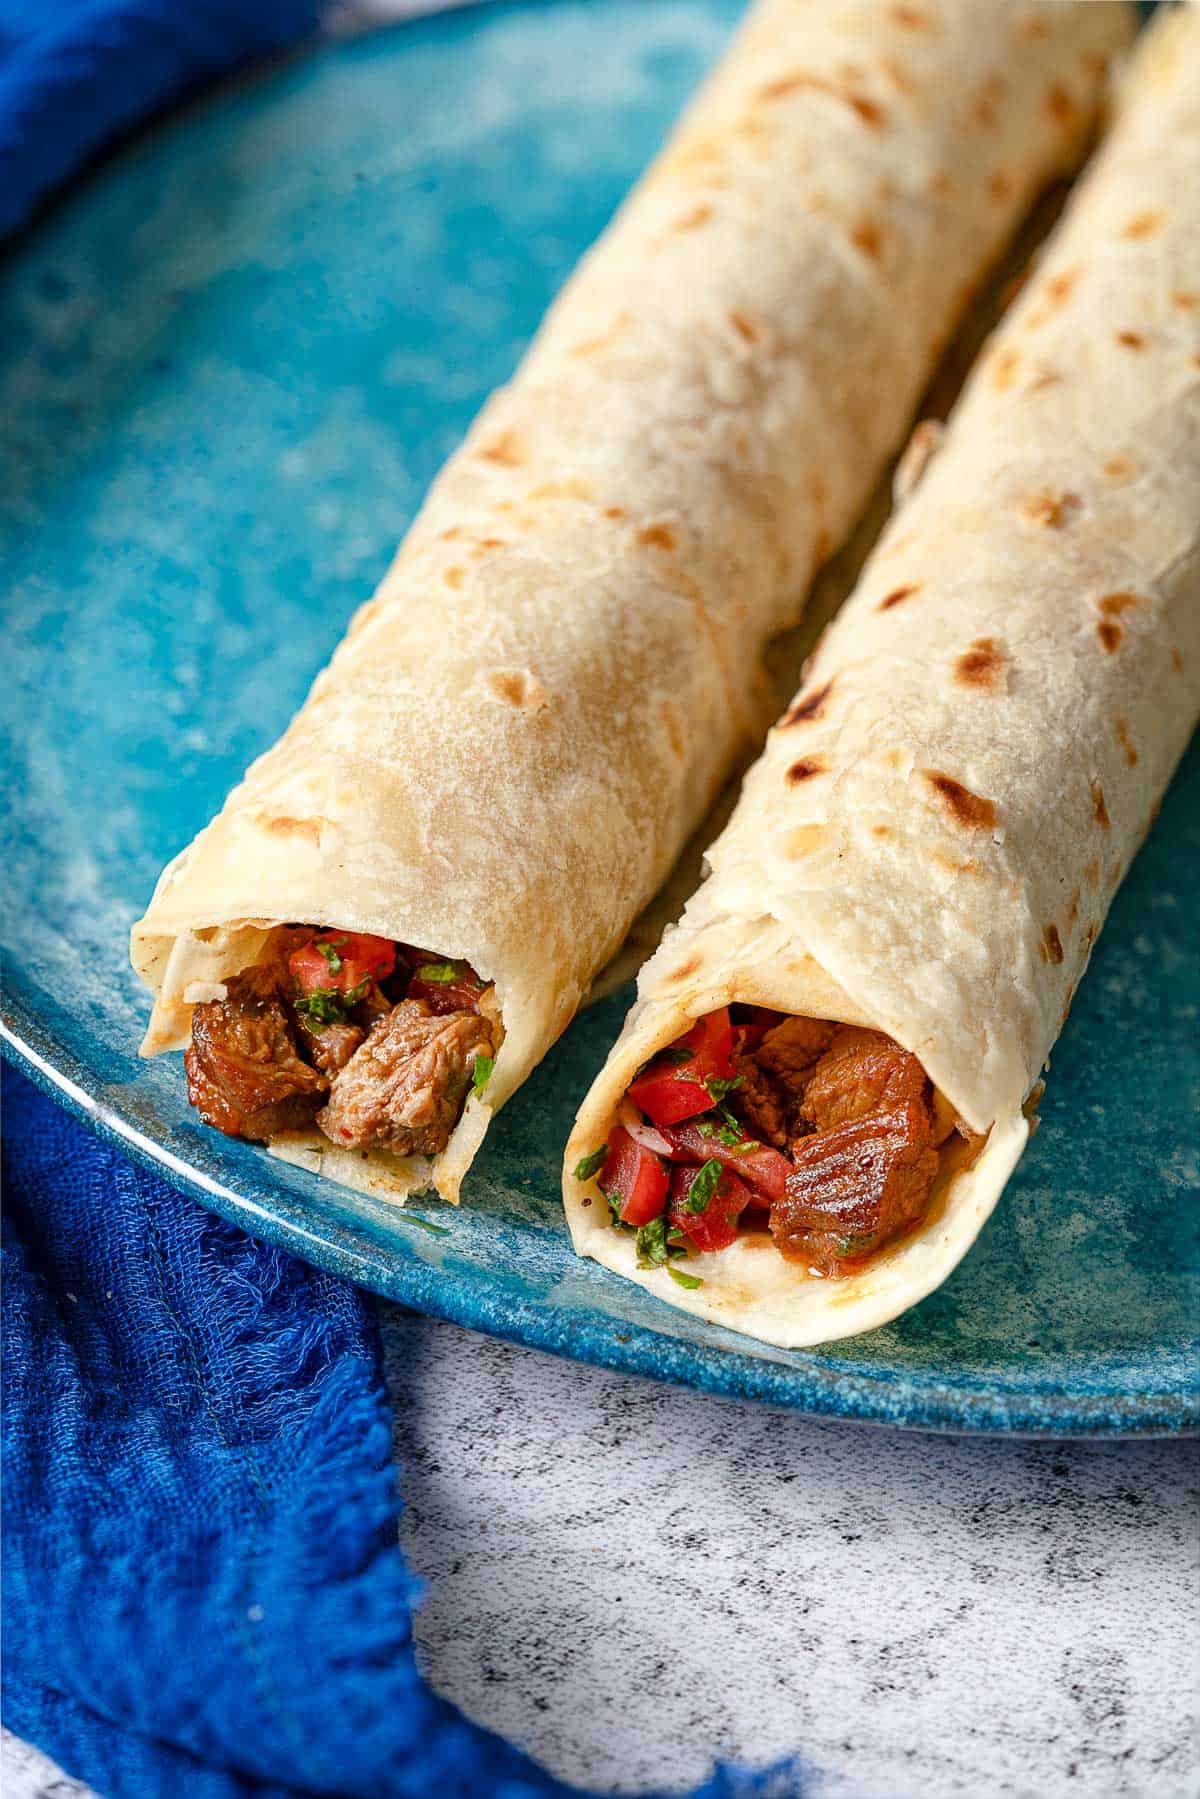 26 wrap recipe ideas perfect for lunch